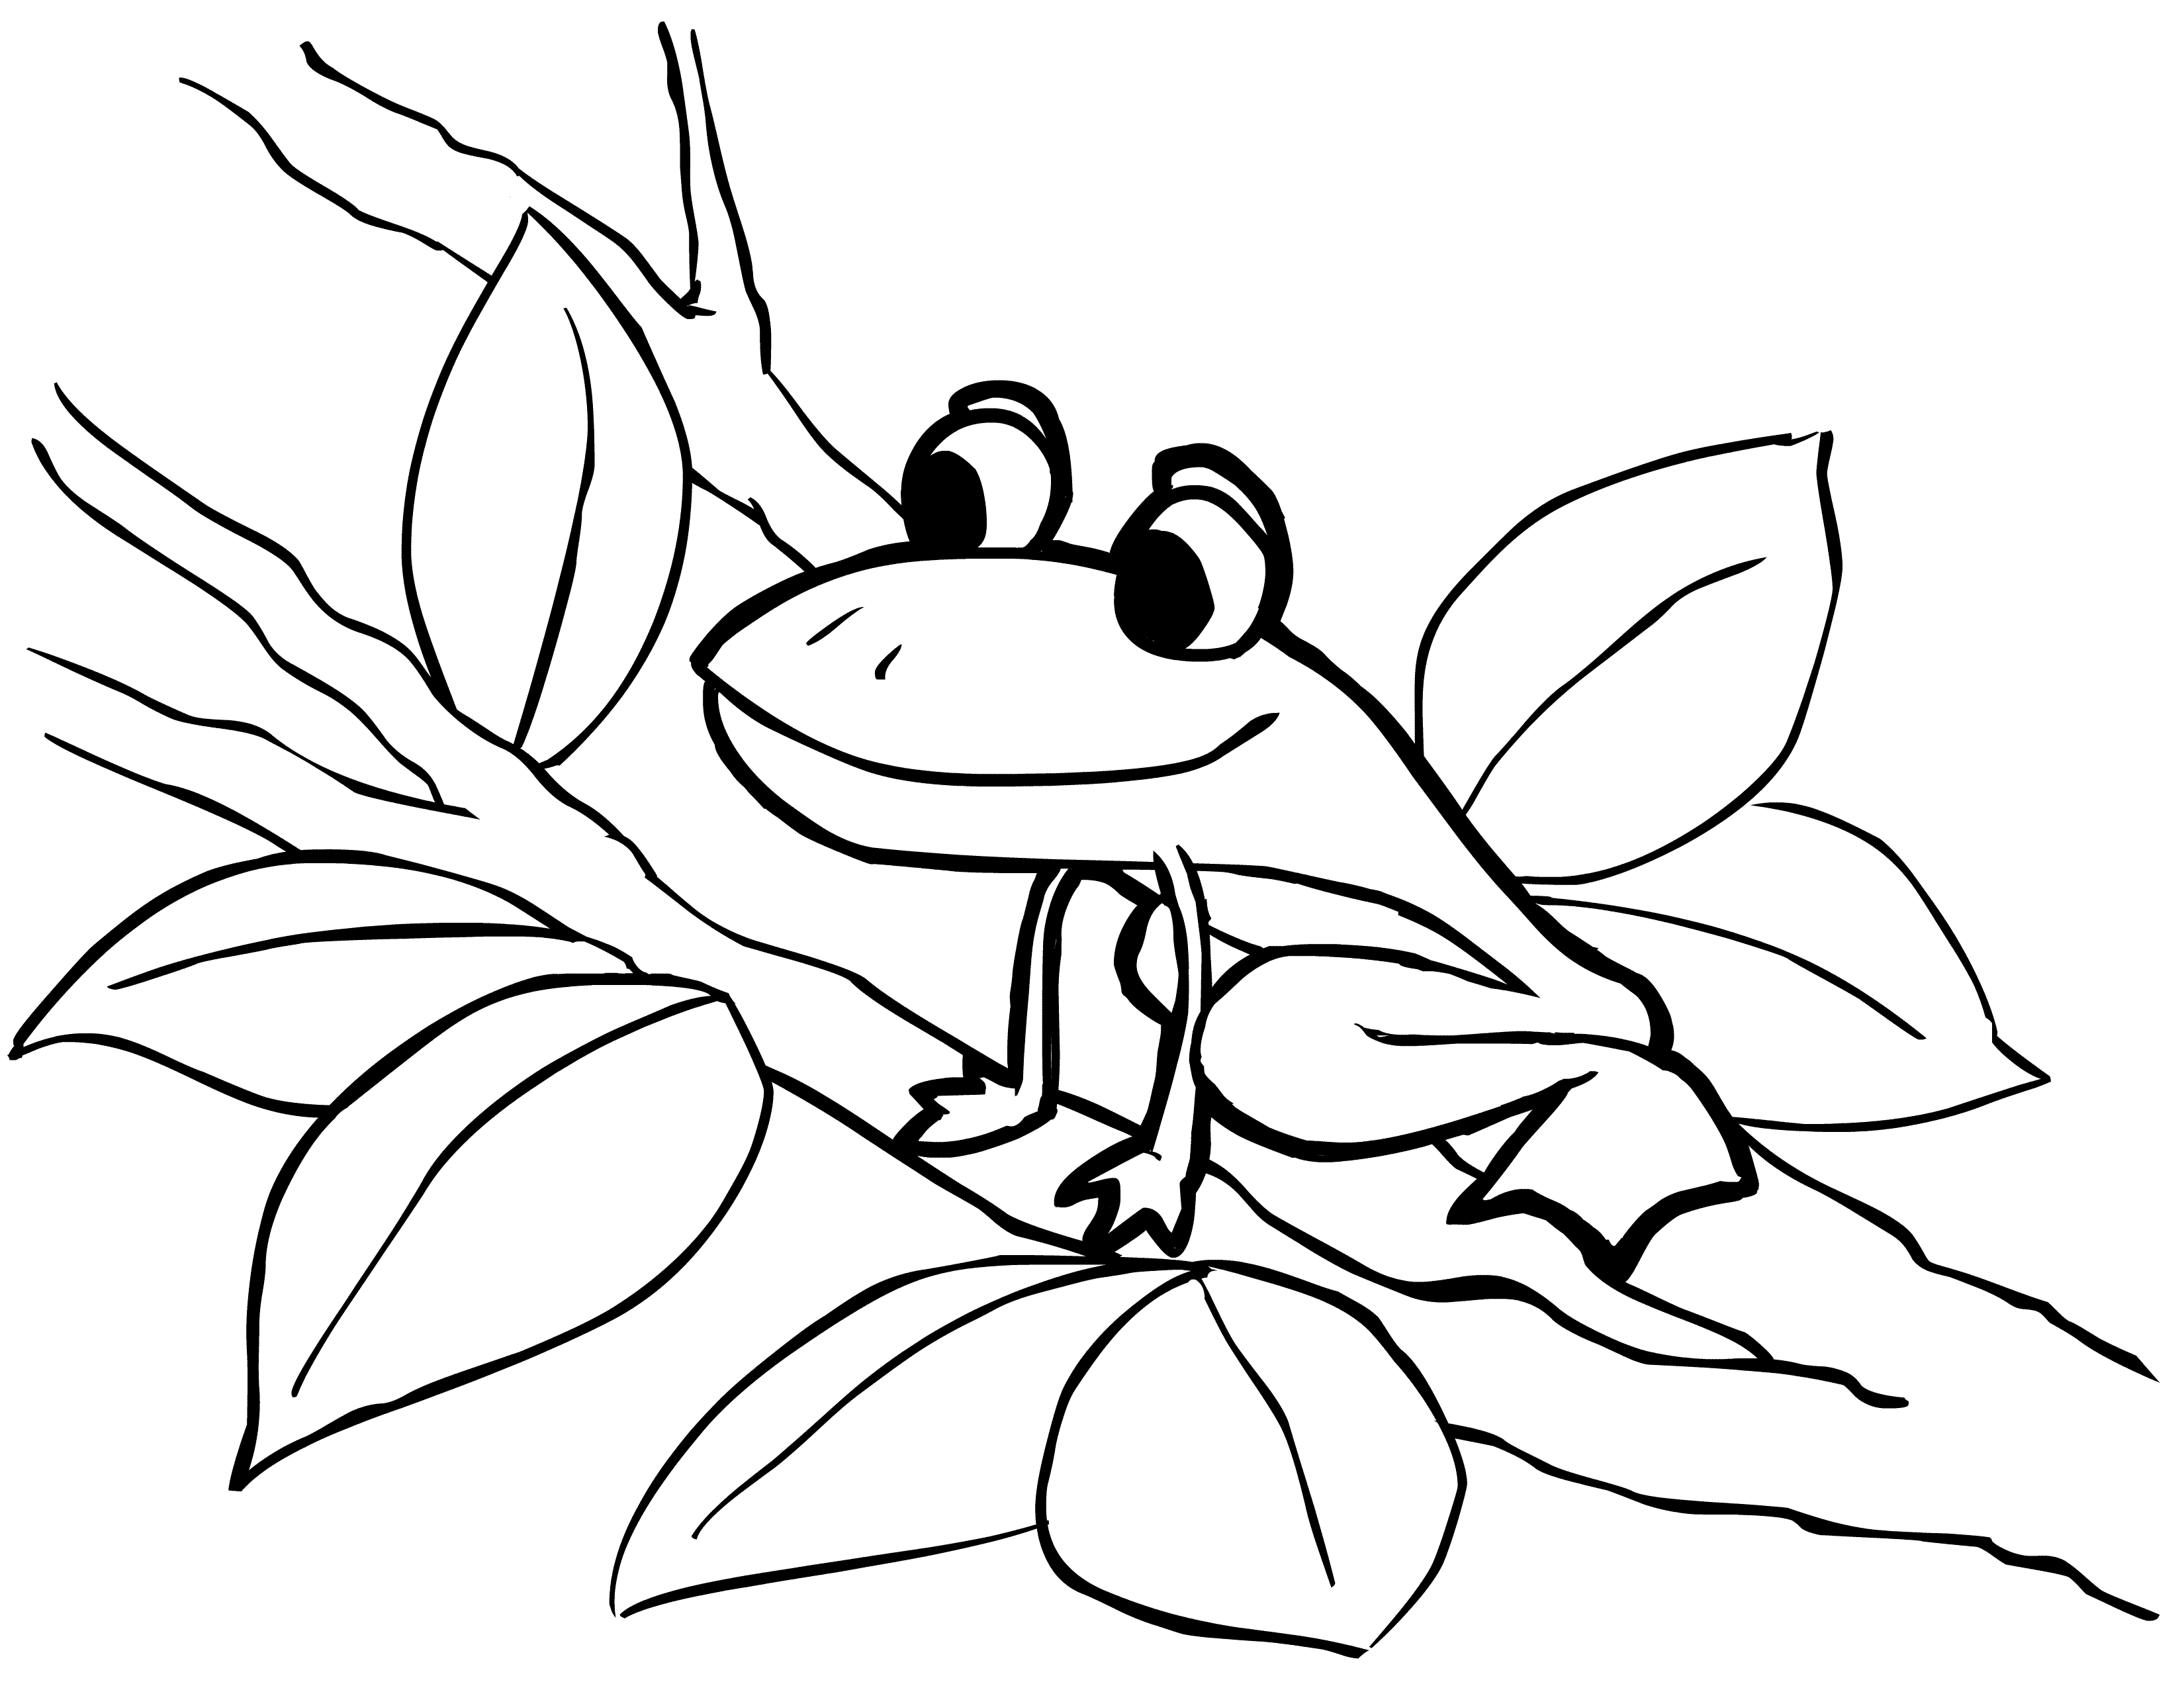 Printable Pictures To Color Frogs